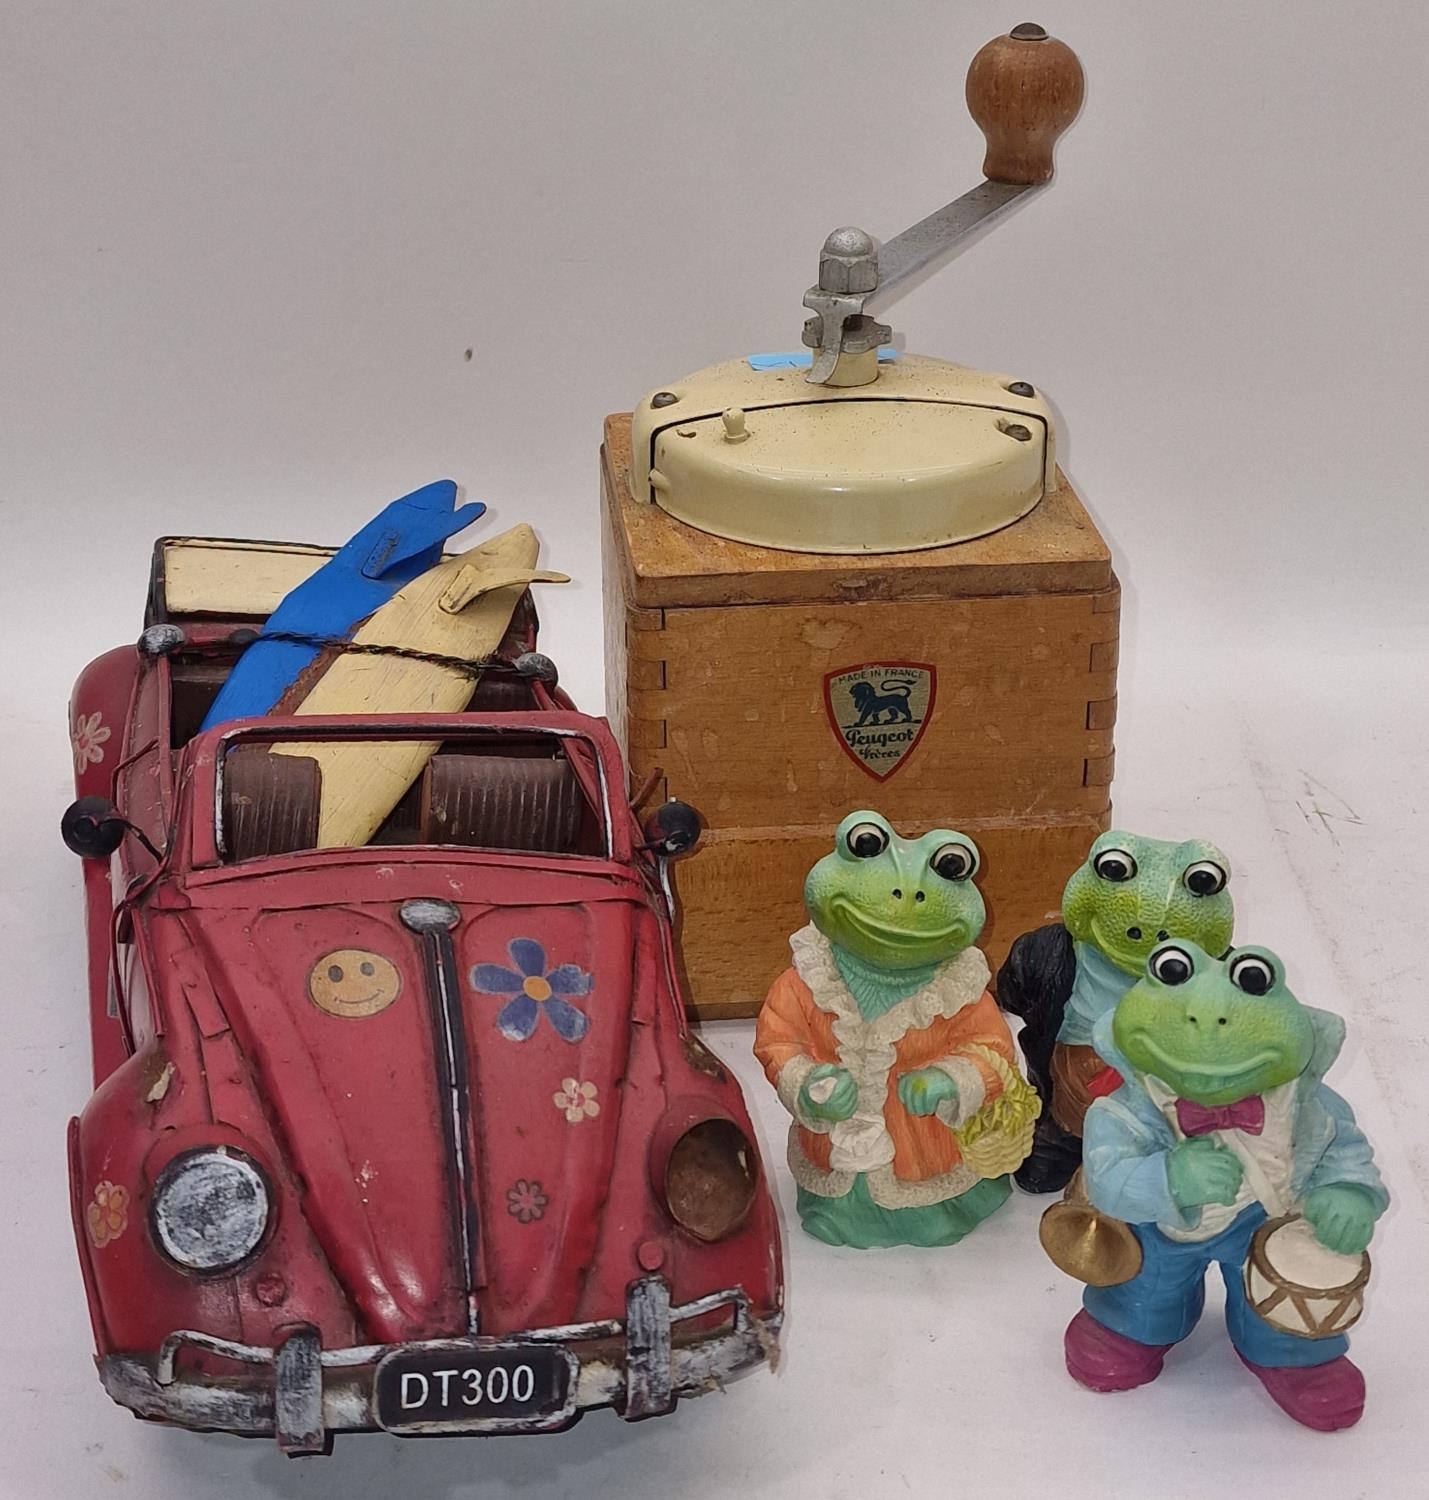 Vintage French Peugeot coffee grinder together with a tin plate model of a car and three frog